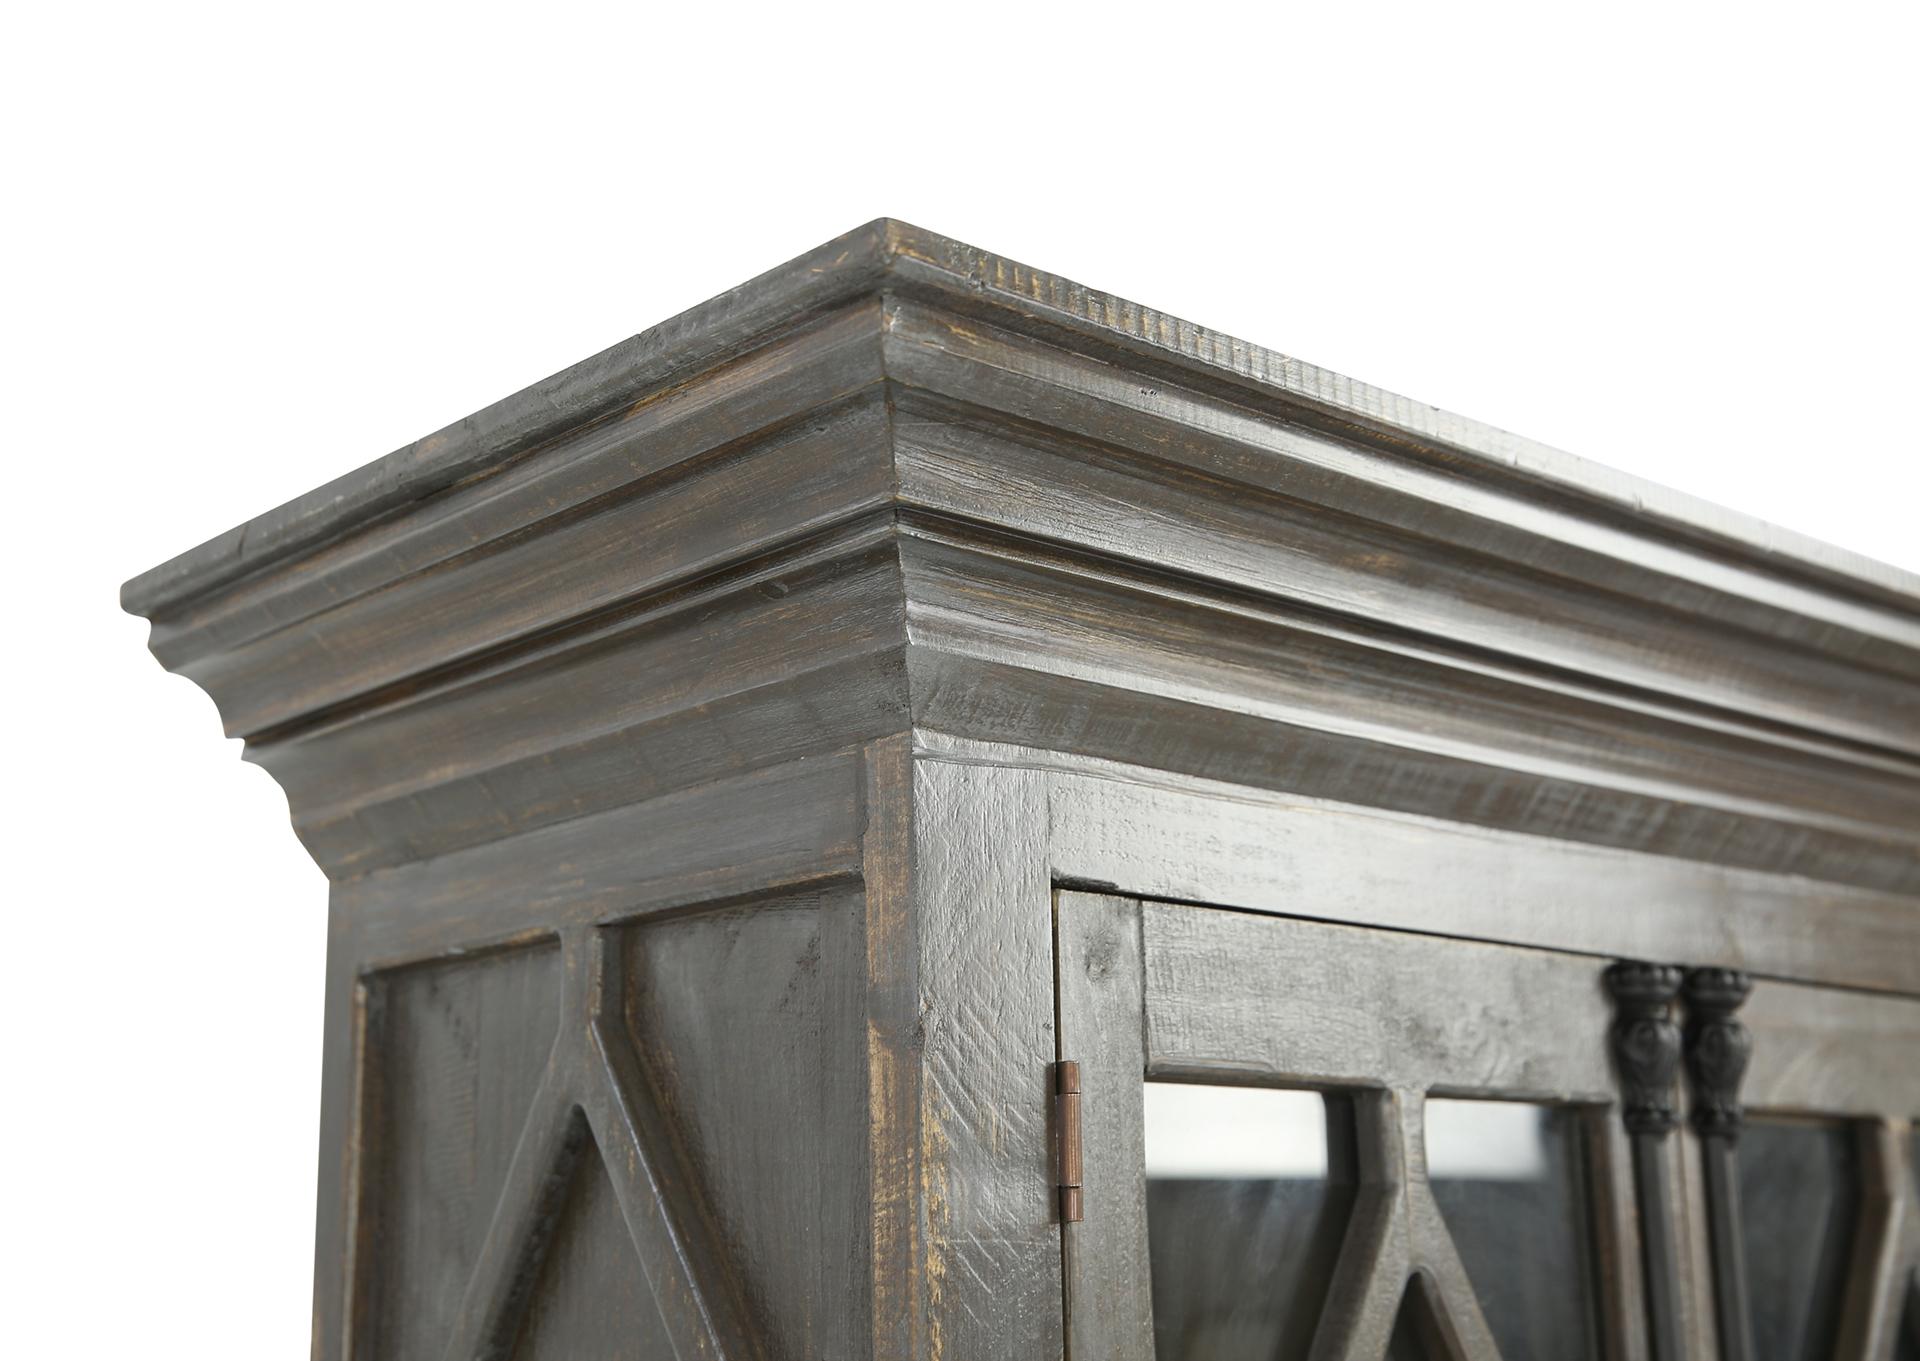 ZAYDEN WEATHERED CABINET,ARDENT HOME